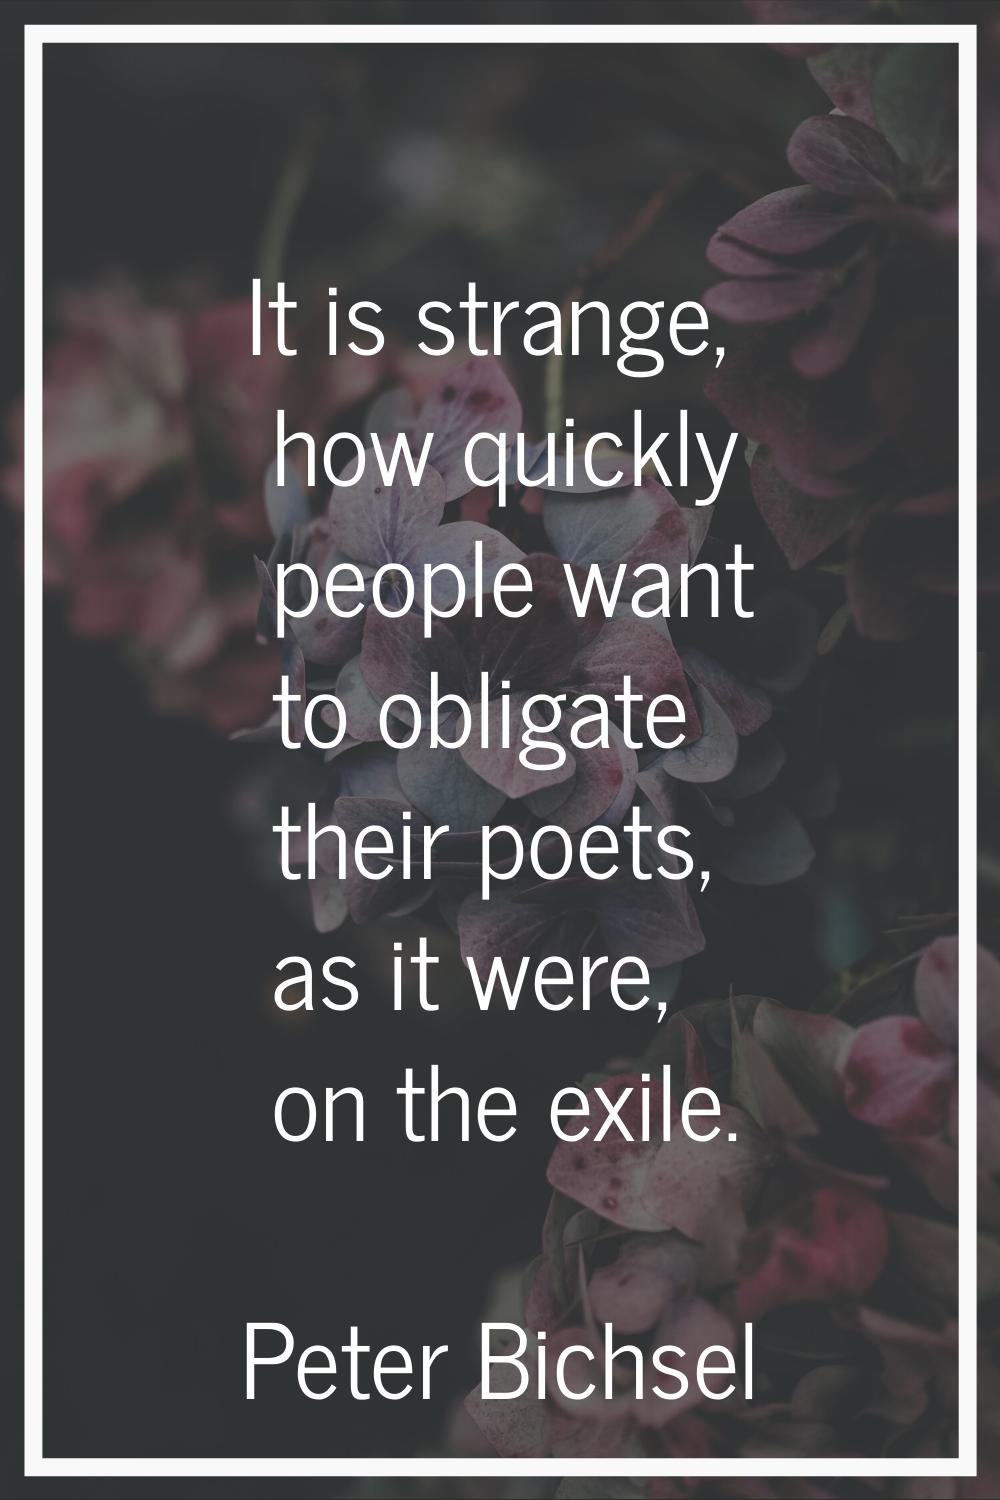 It is strange, how quickly people want to obligate their poets, as it were, on the exile.